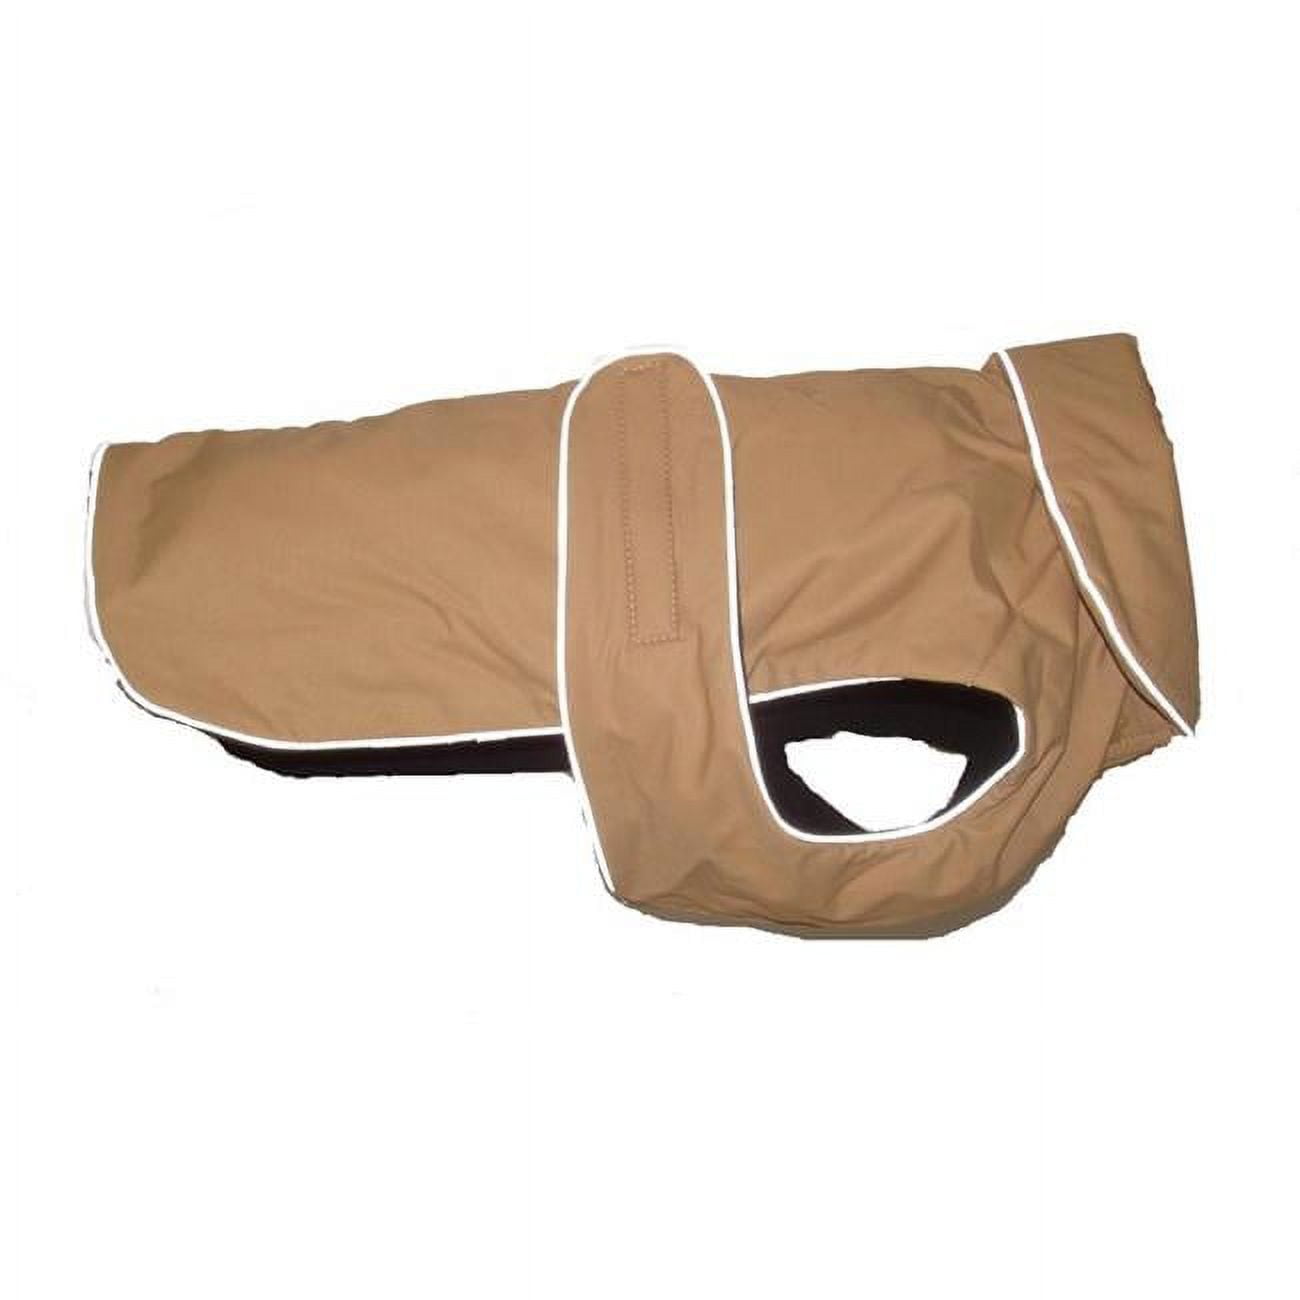 Picture of A Pets World 08192911-8 Weather Resistant Fleece Lined Dog Coat, Tan